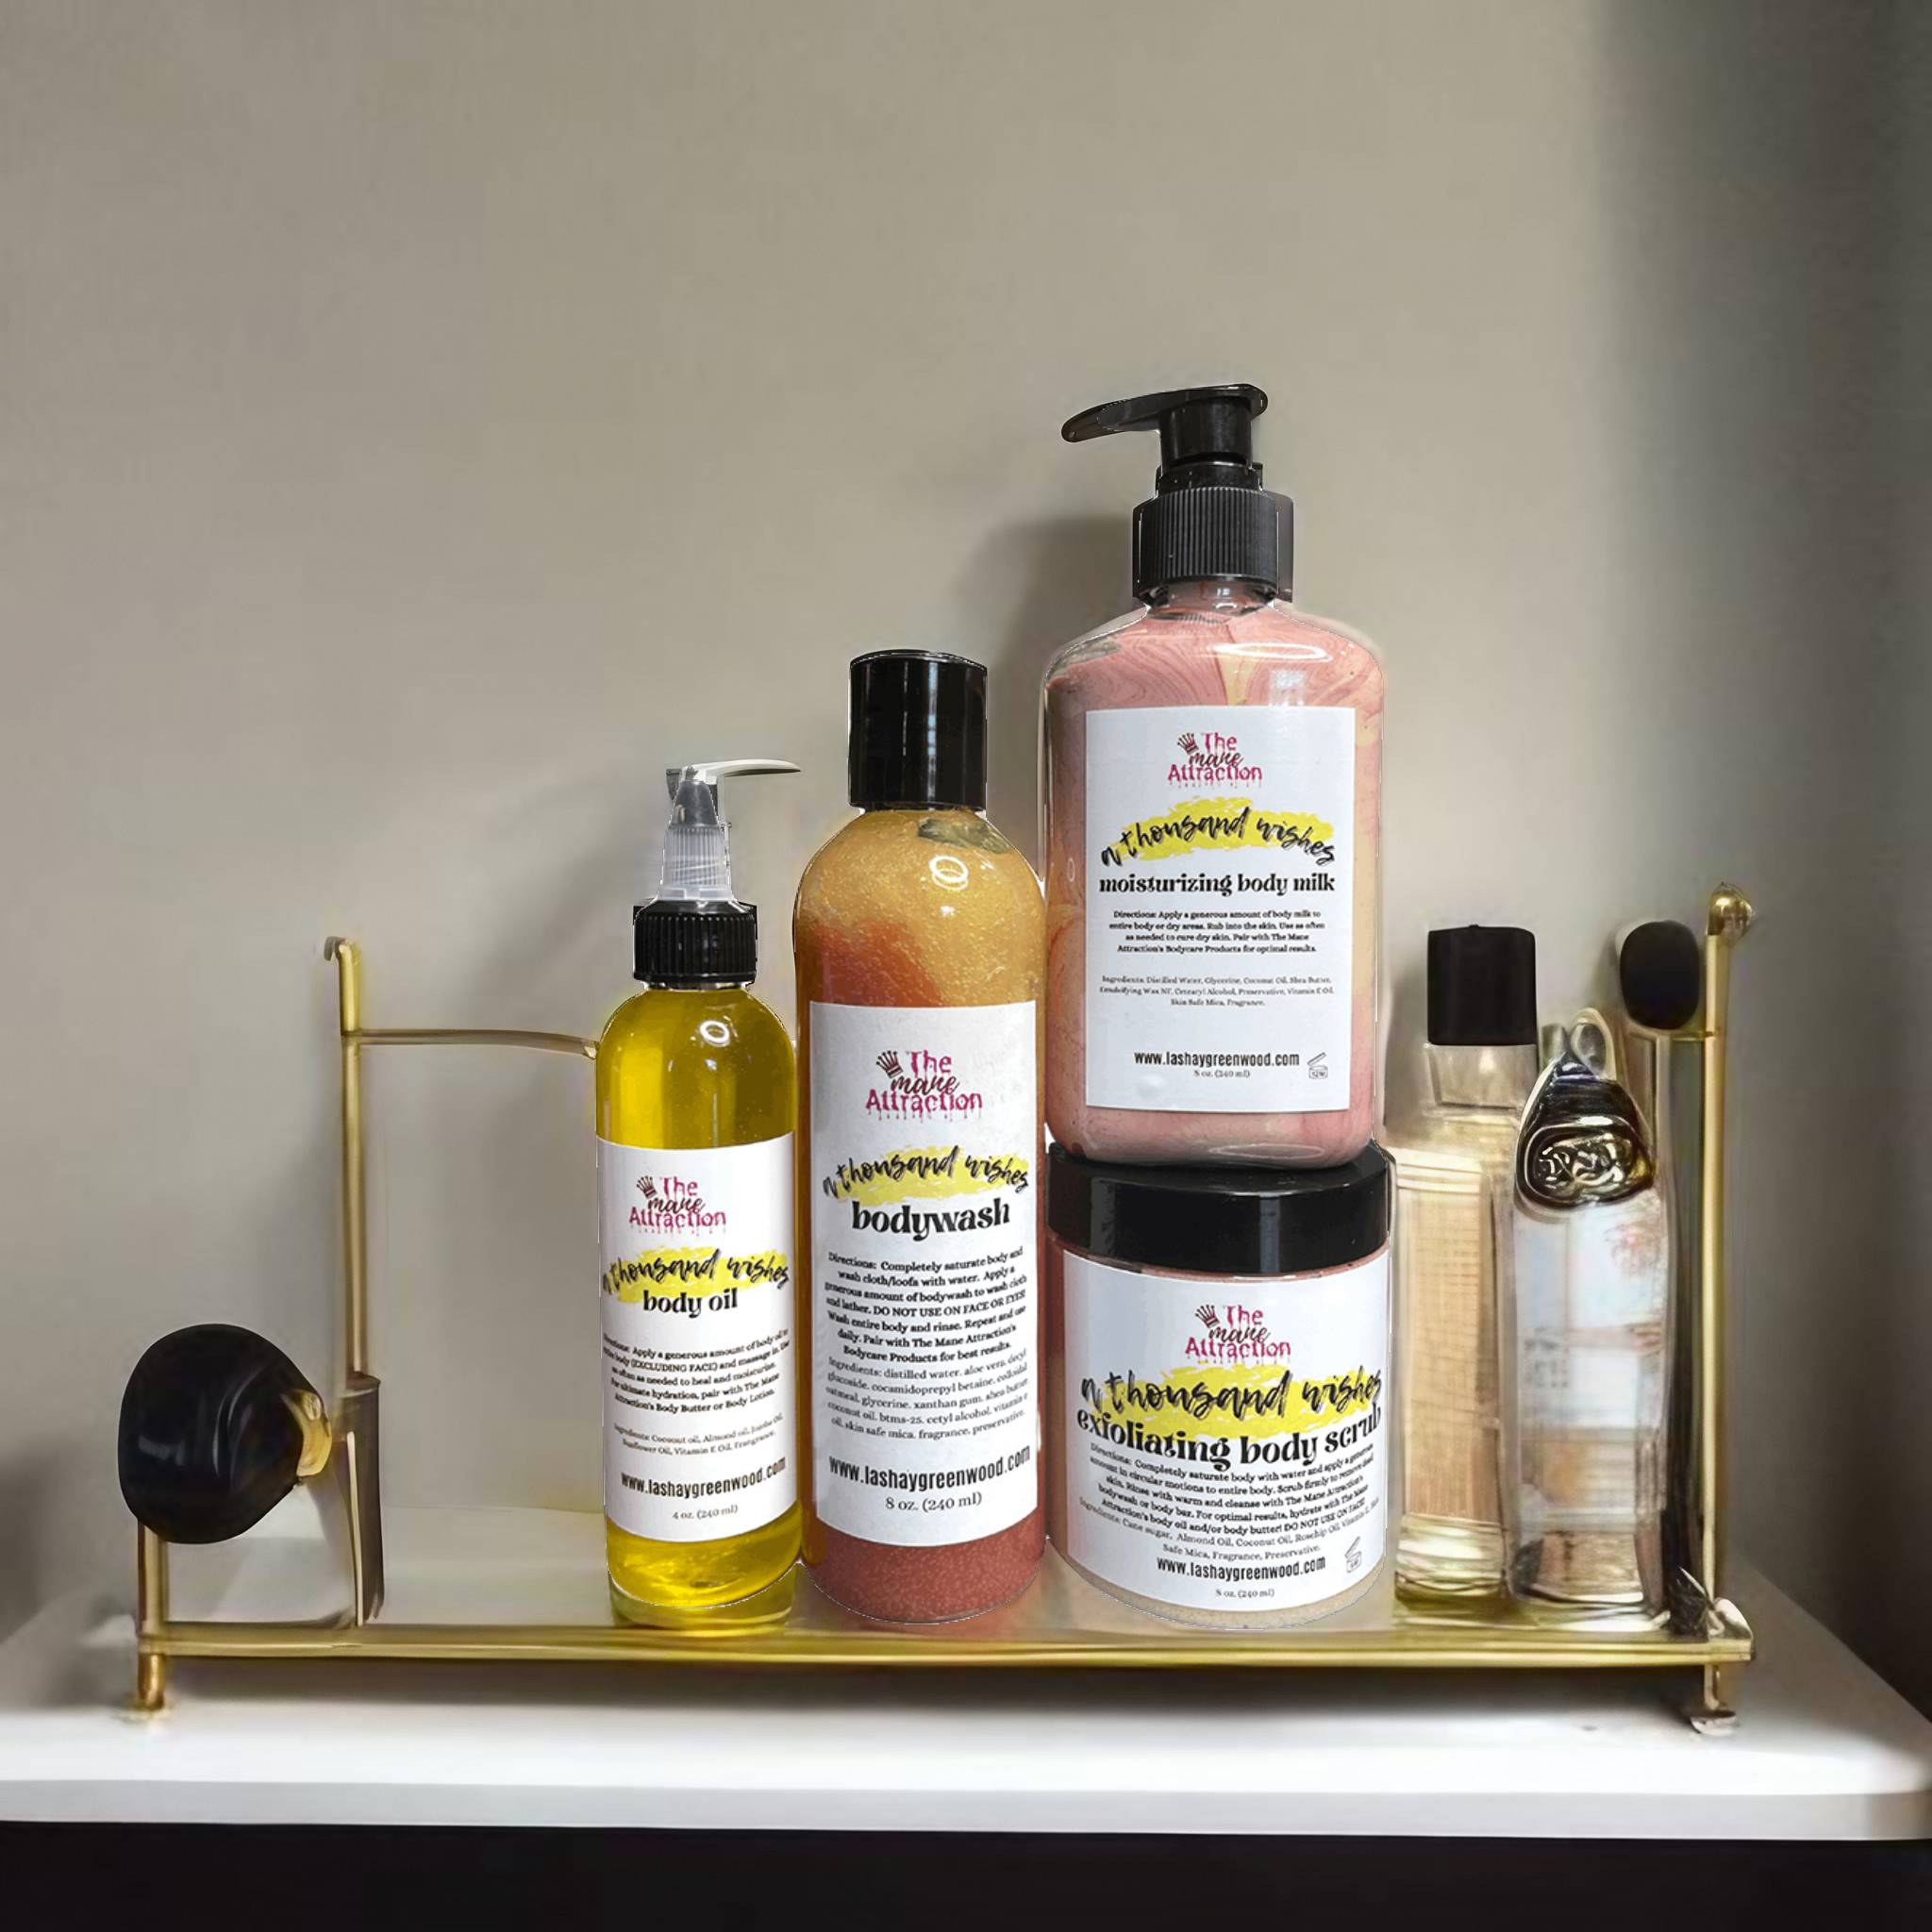 A Thousand Wishes Bodycare Bundle - The Mane Attraction